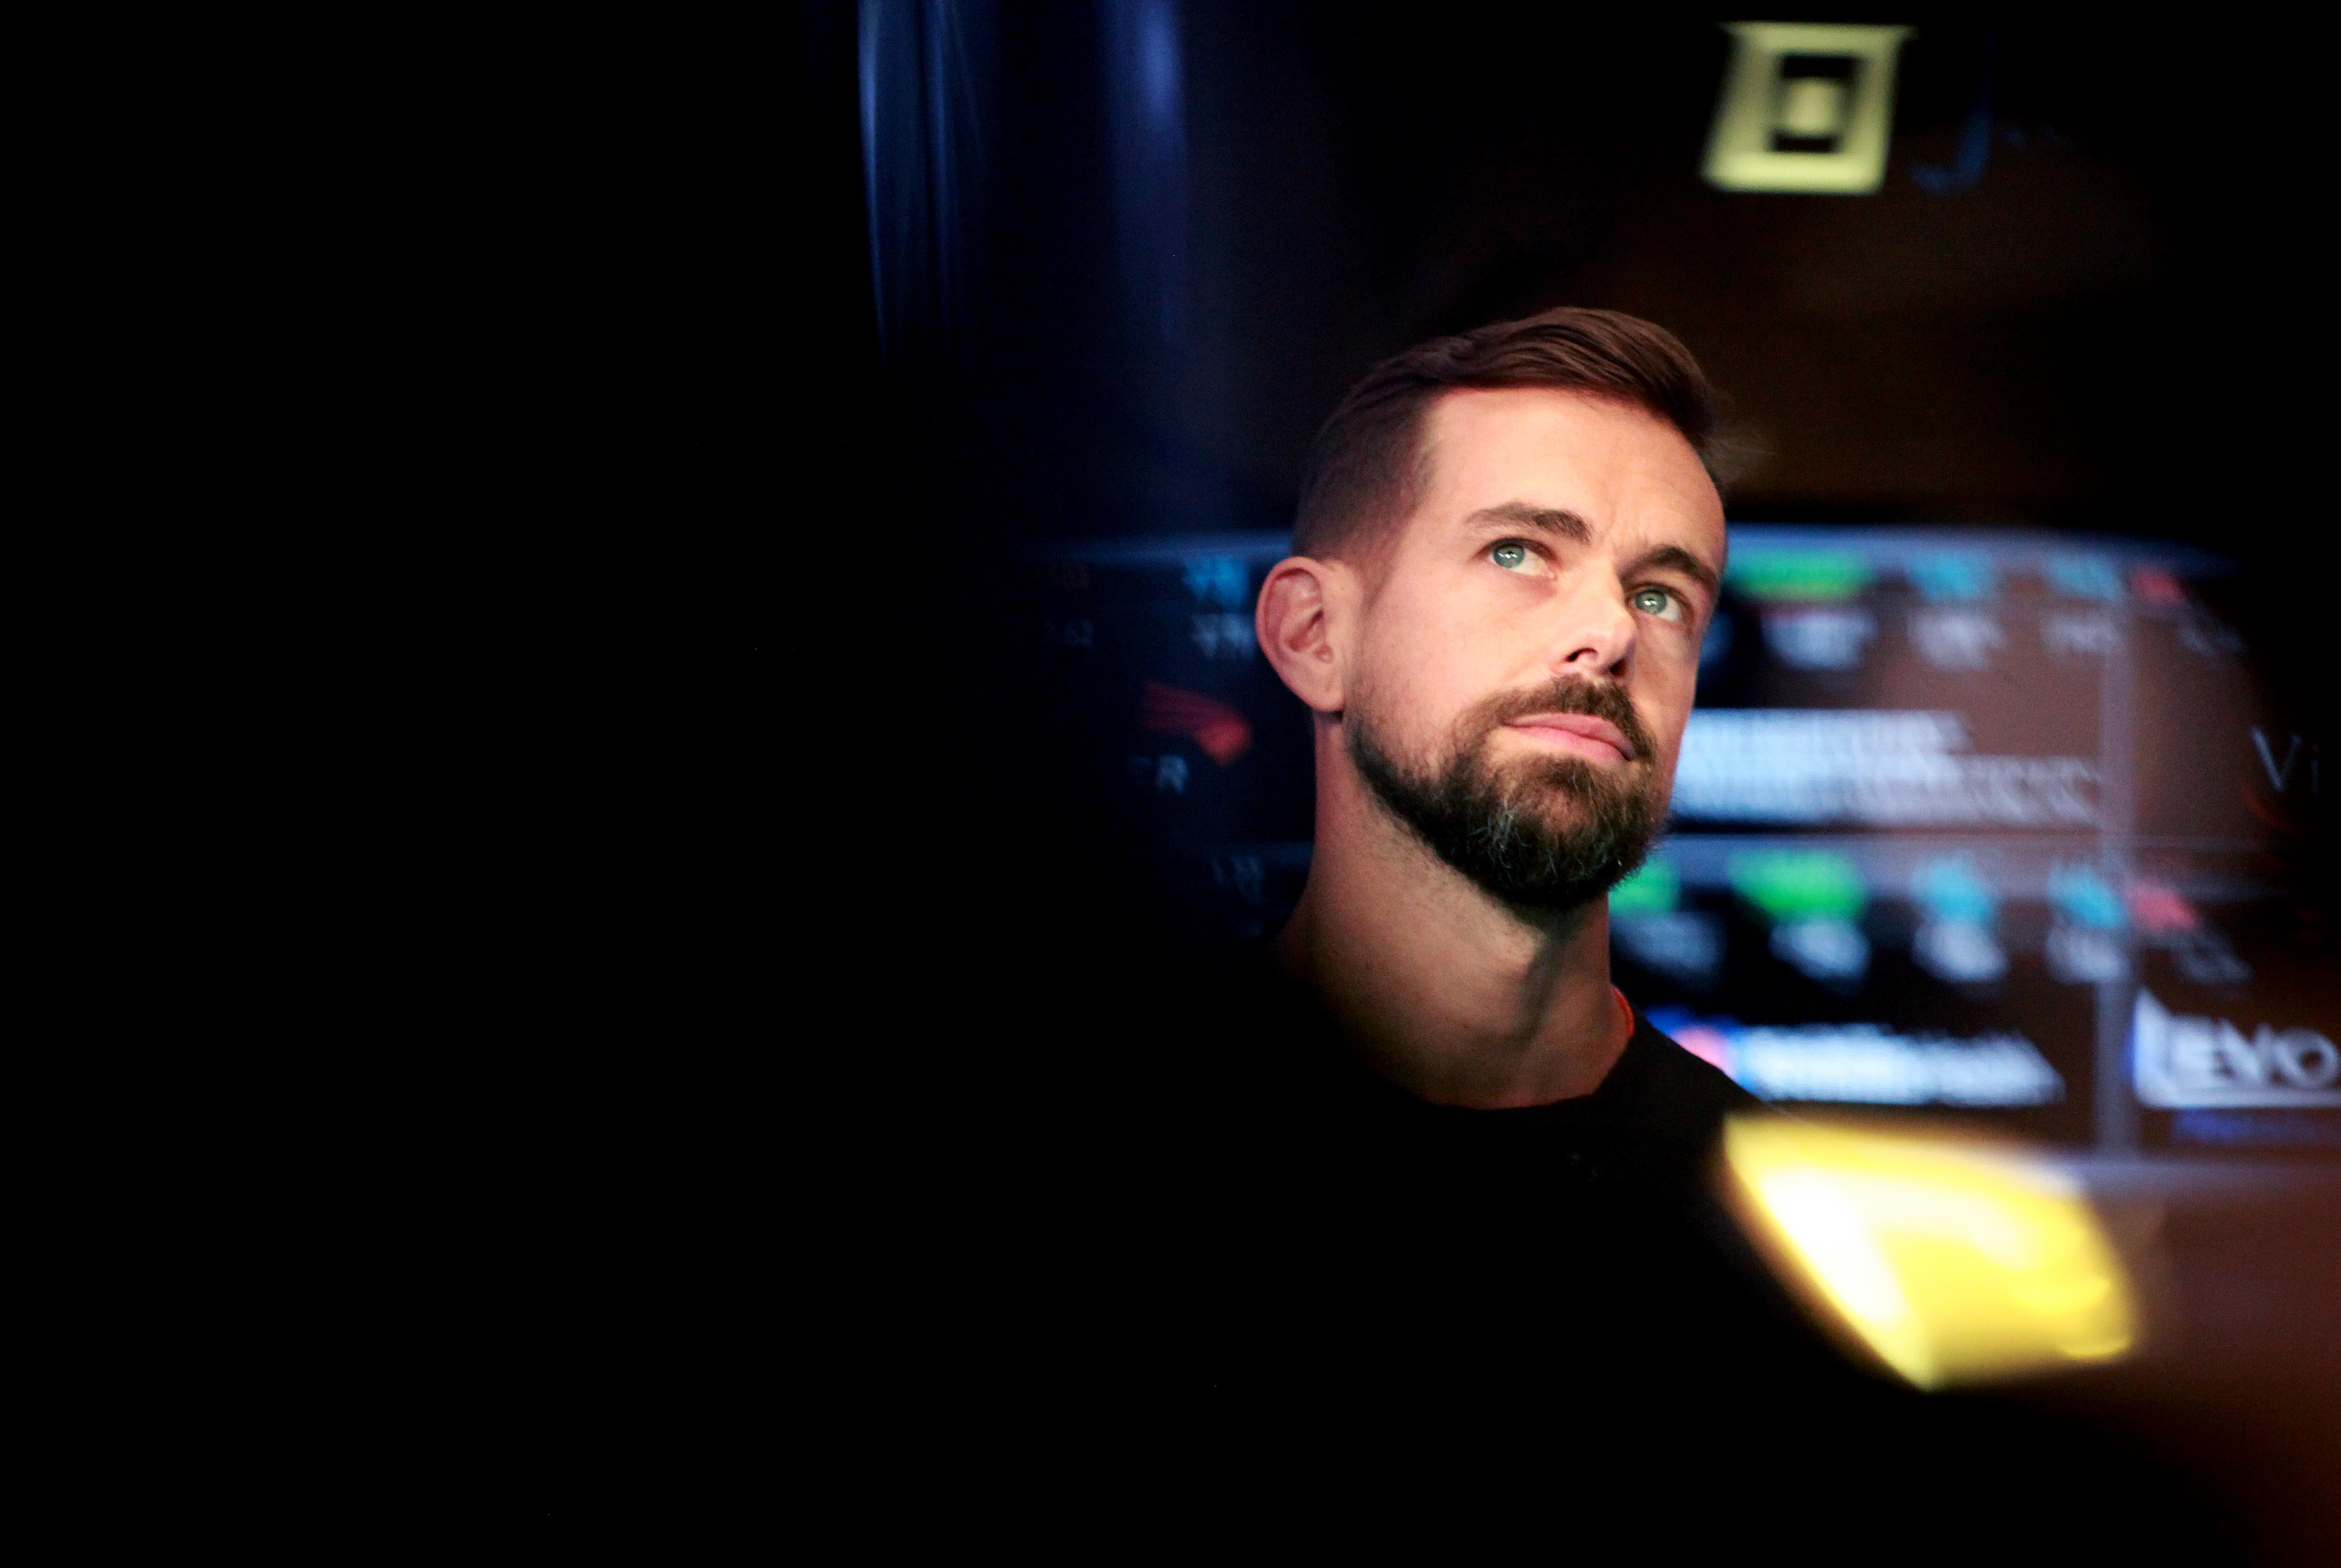 Jack Dorsey, chief executive officer of Square Inc., listens during an interview on the floor of the New York Stock Exchange in New York, Nov. 19, 2015 (Bloomberg/Getty Images)